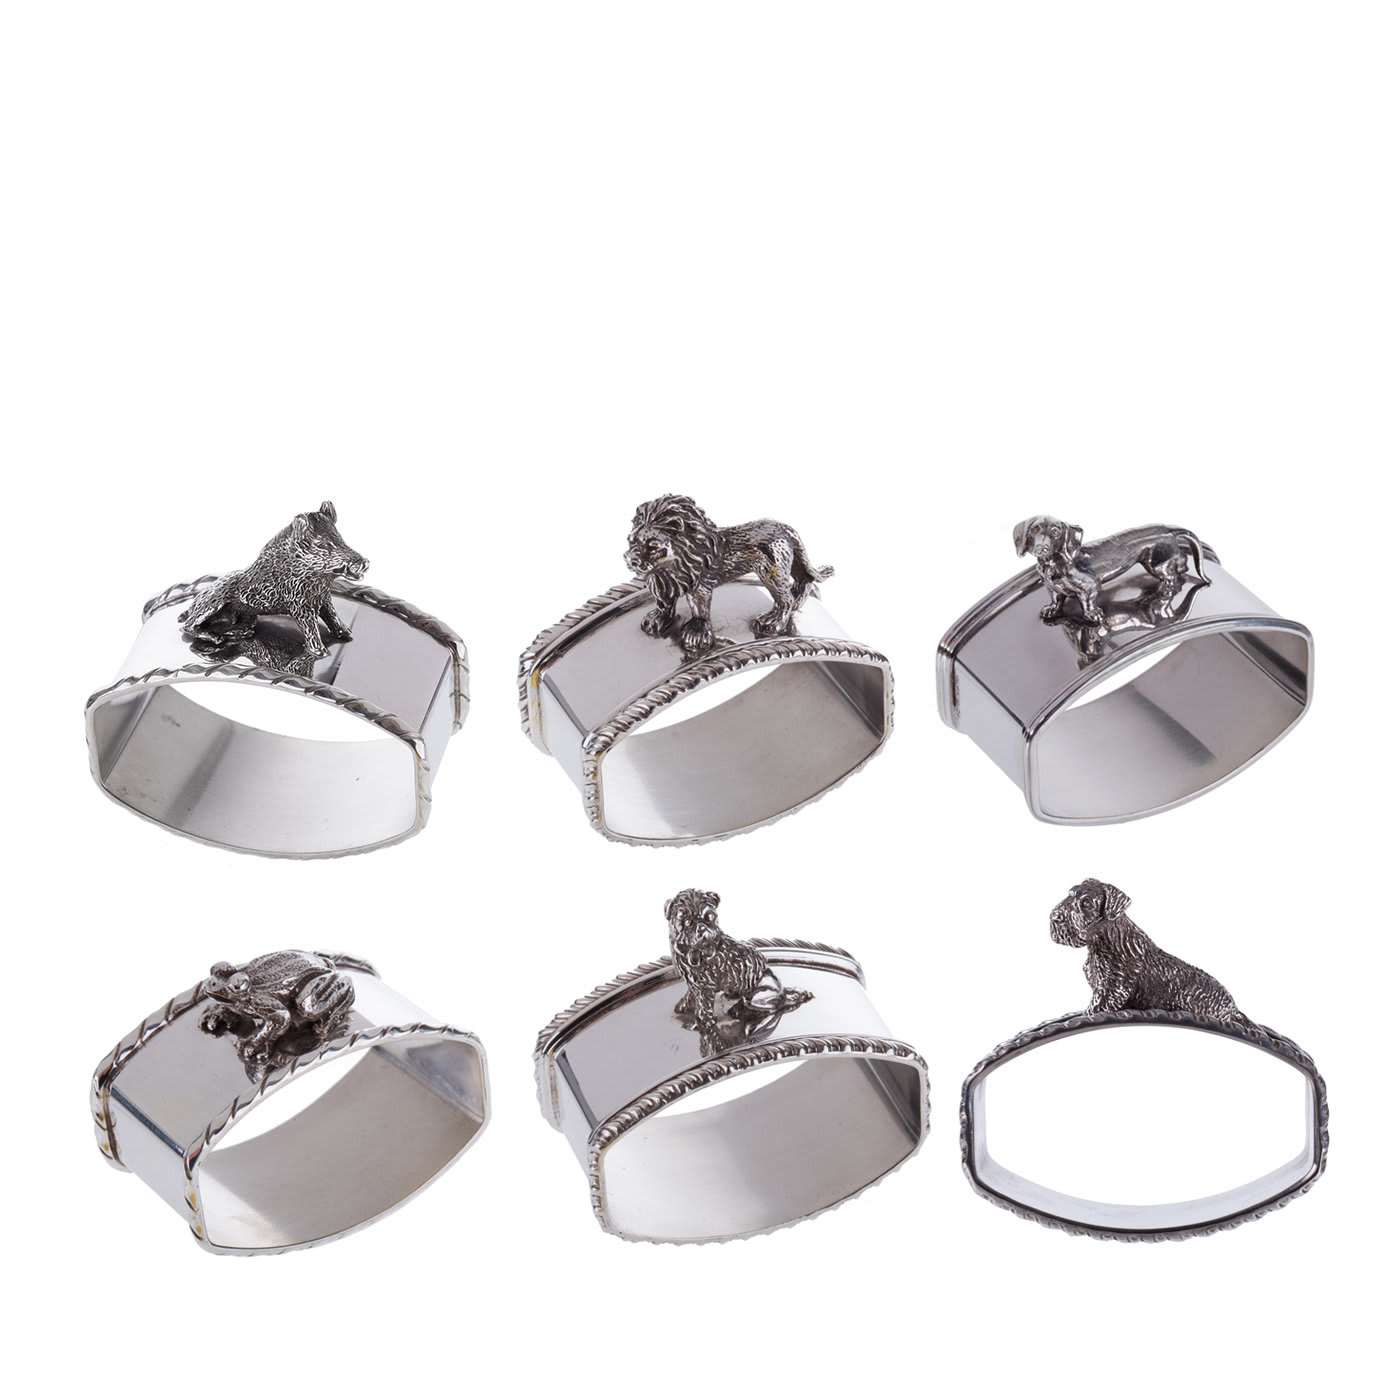 Set of 6 Animal Sterling Silver Napkin Holders - Argentiere Pagliai